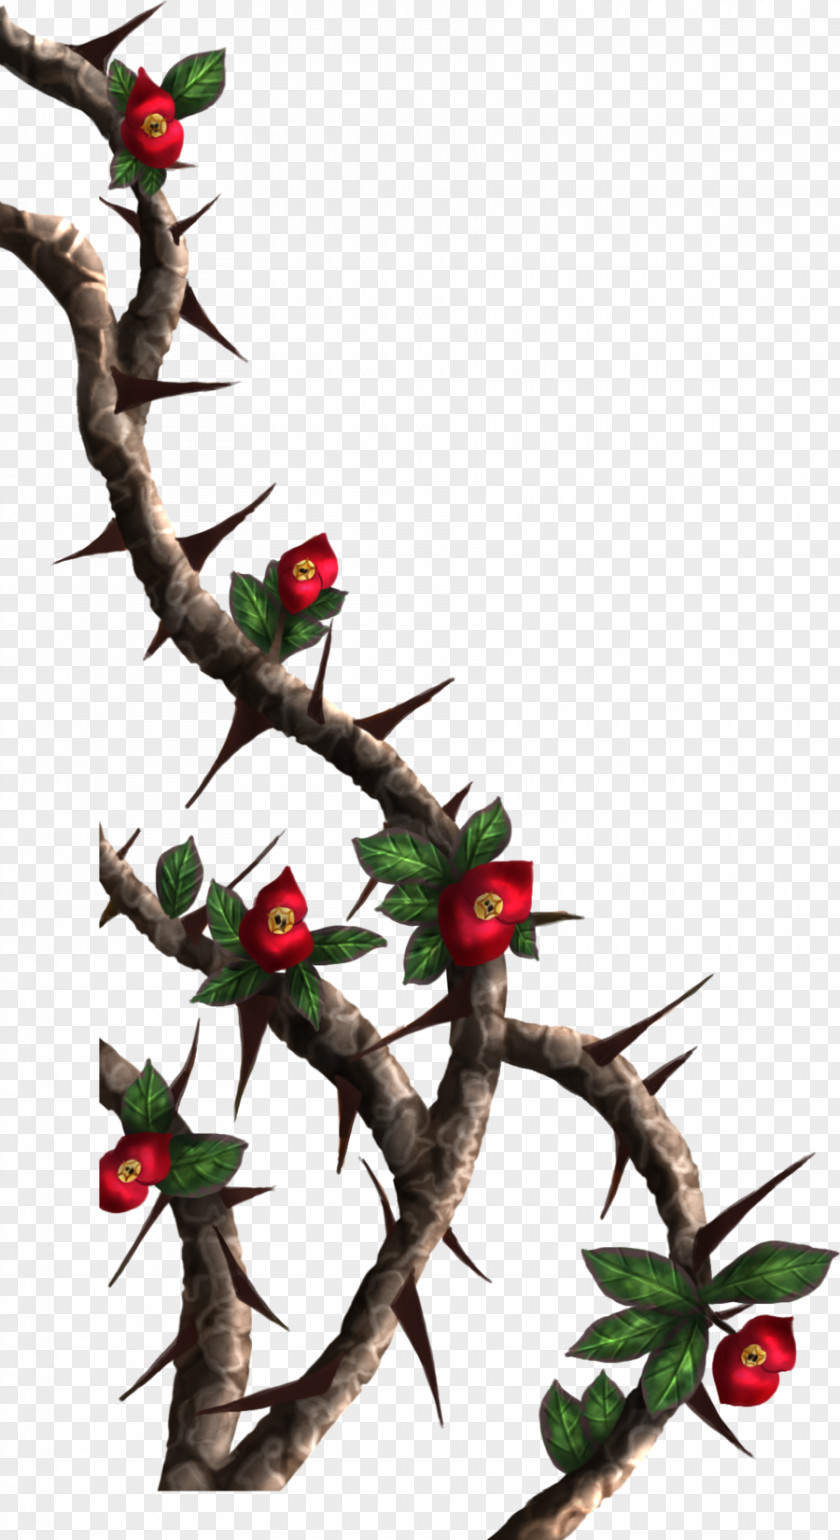 Thorn Thorns, Spines, And Prickles Rose Crown Of Thorns Drawing Clip Art PNG